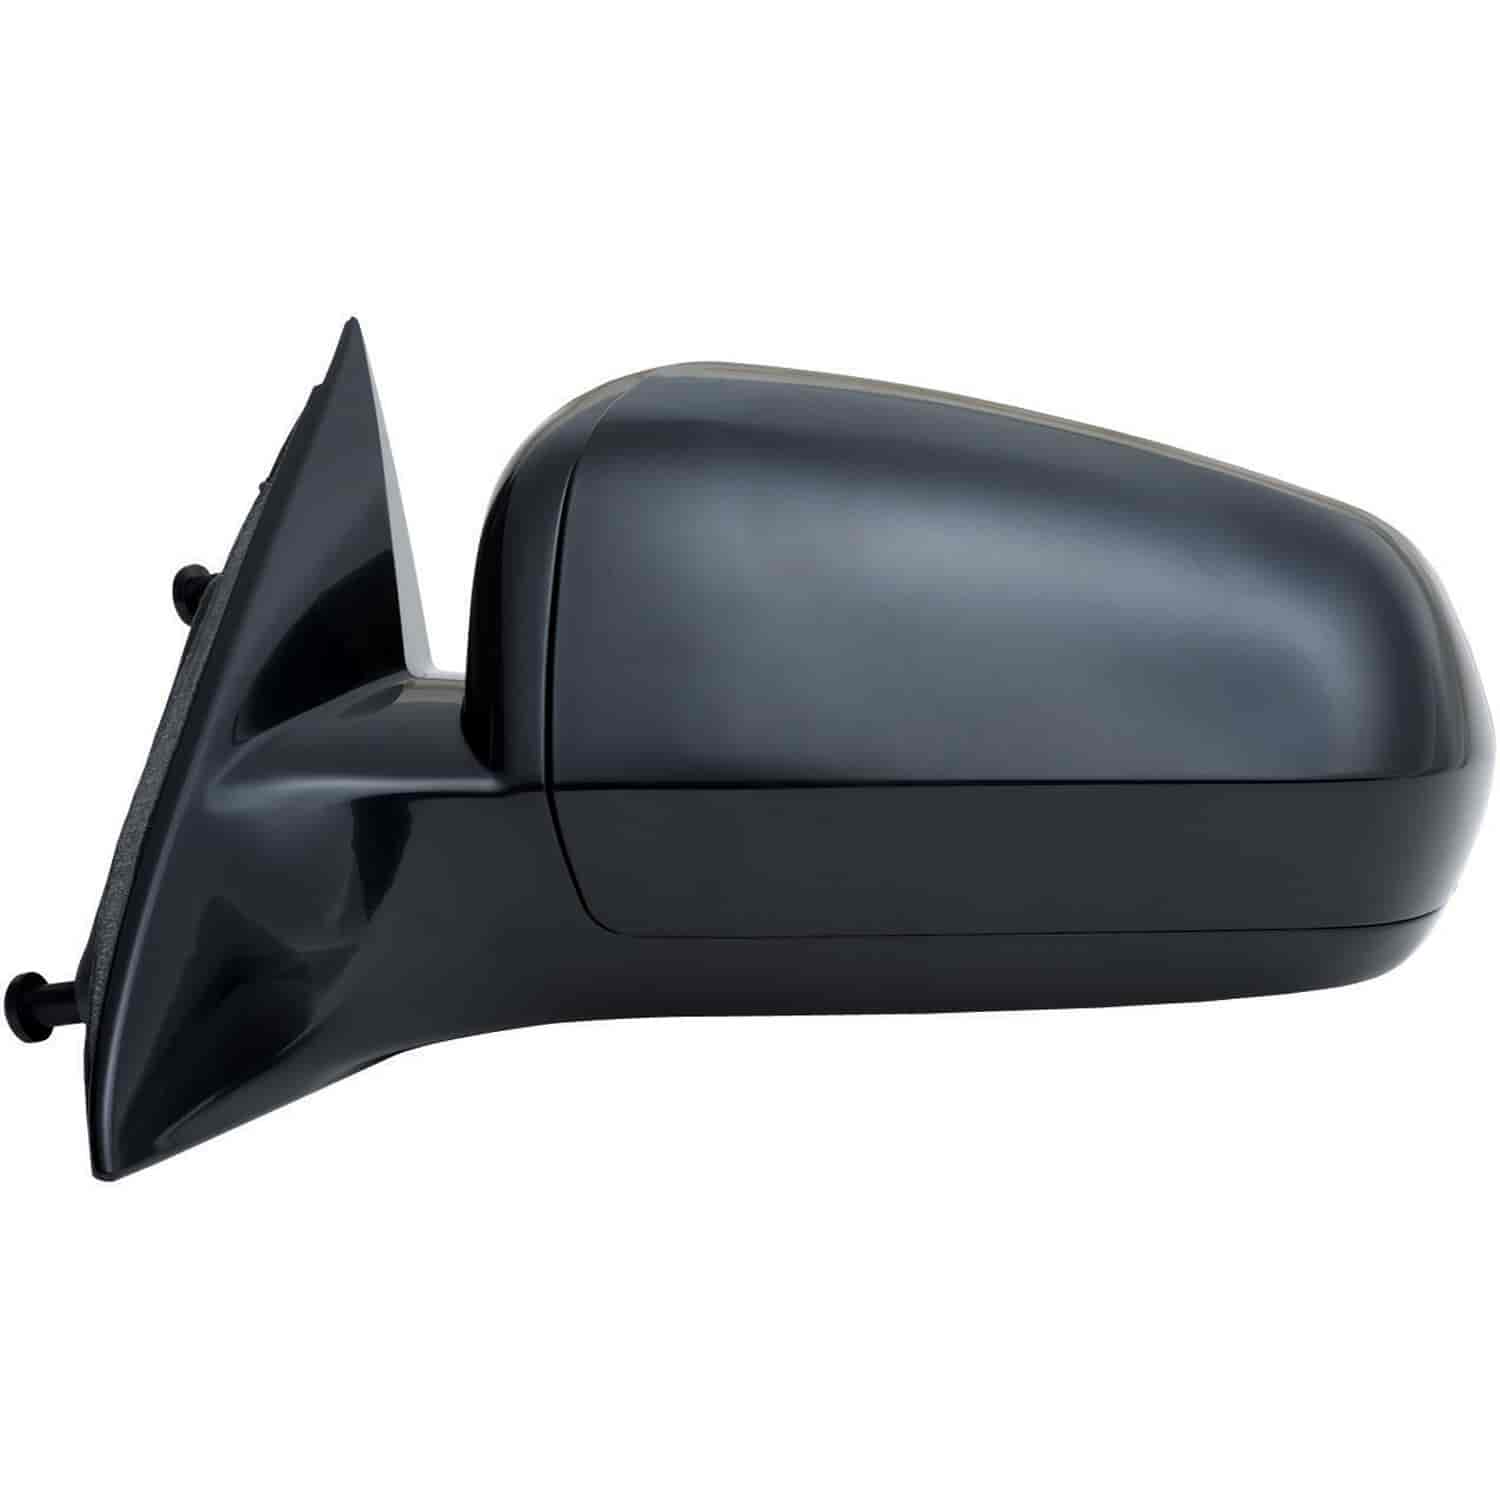 OEM Style Replacement mirror for 07-10 Chrysler Sebring